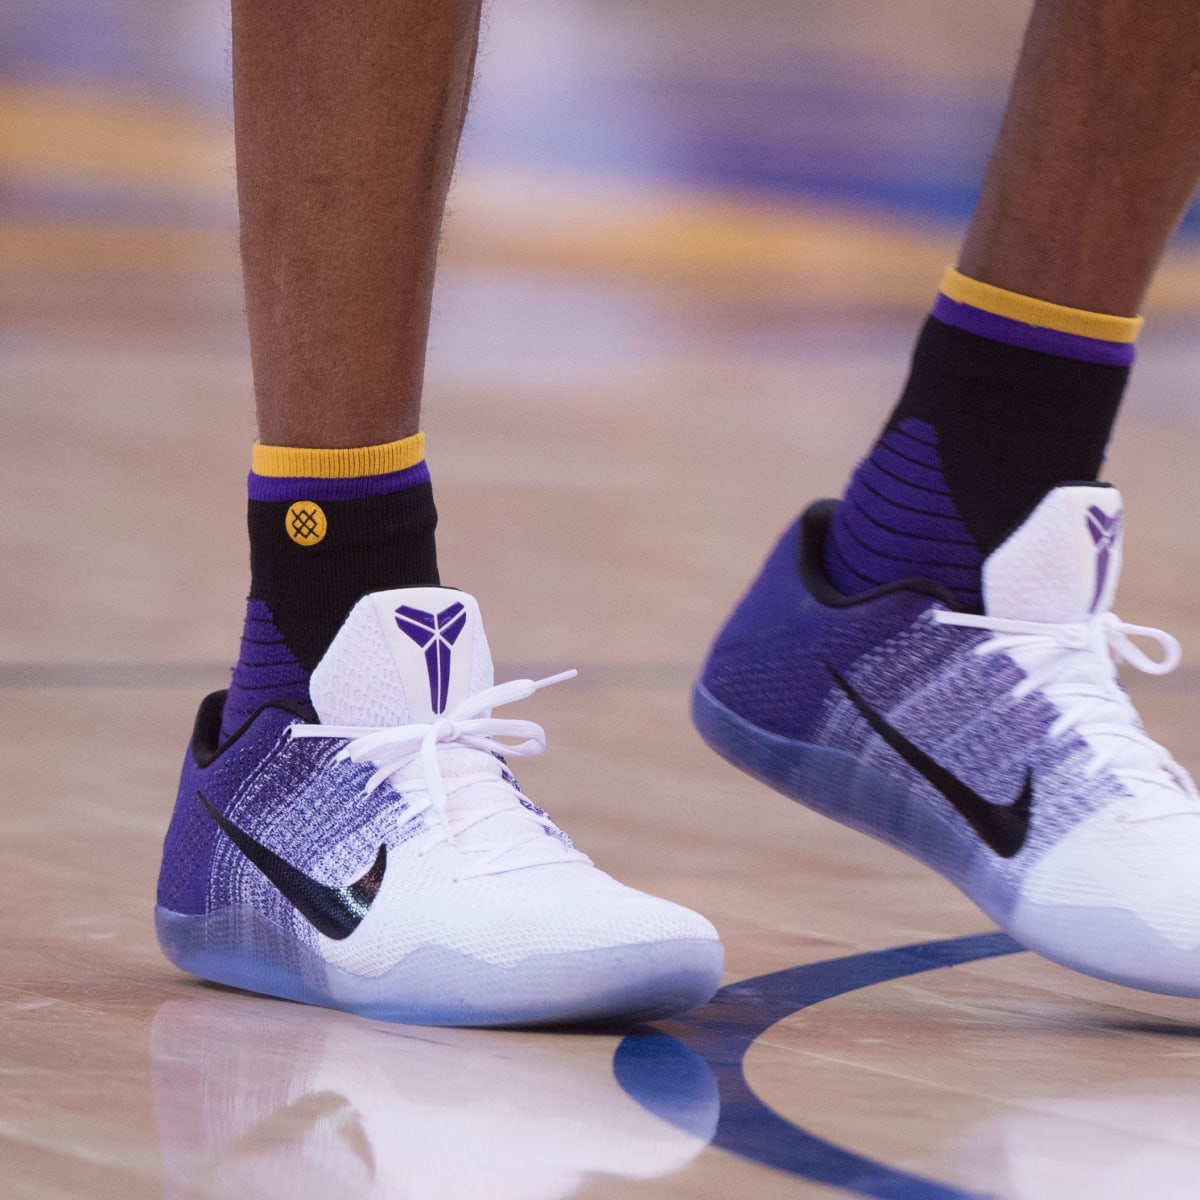 is Nike Releasing More of Kobe Bryant's Shoes? Sports Illustrated FanNation Kicks News, Analysis and More